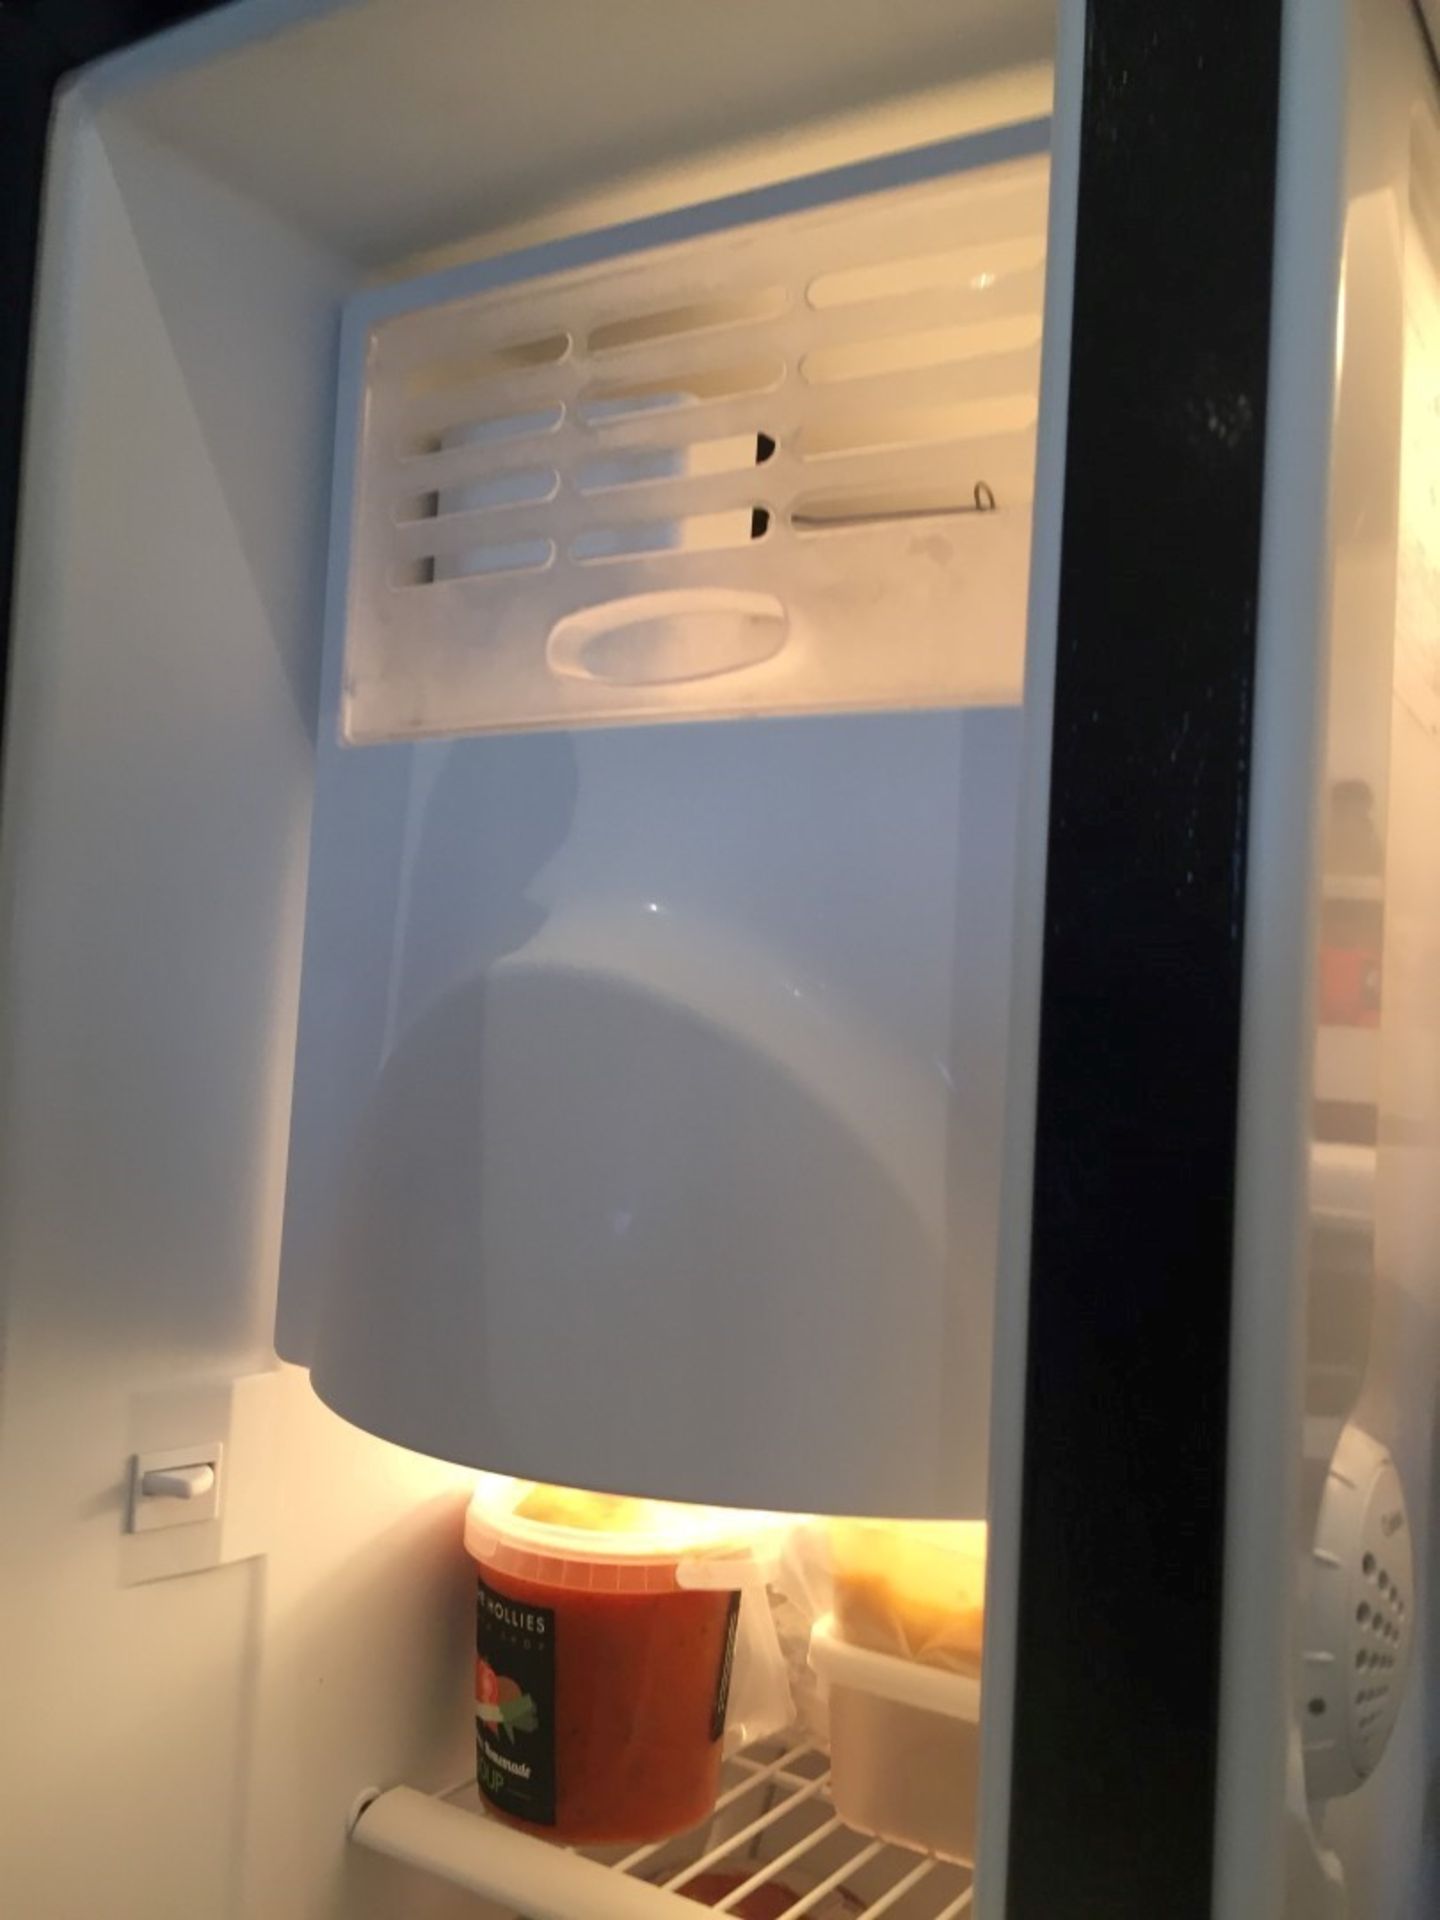 1 x Maytag Side by Side American Fridge Freezer with Ice & Water Dispenser (GC2225GEKS) - - Image 7 of 7